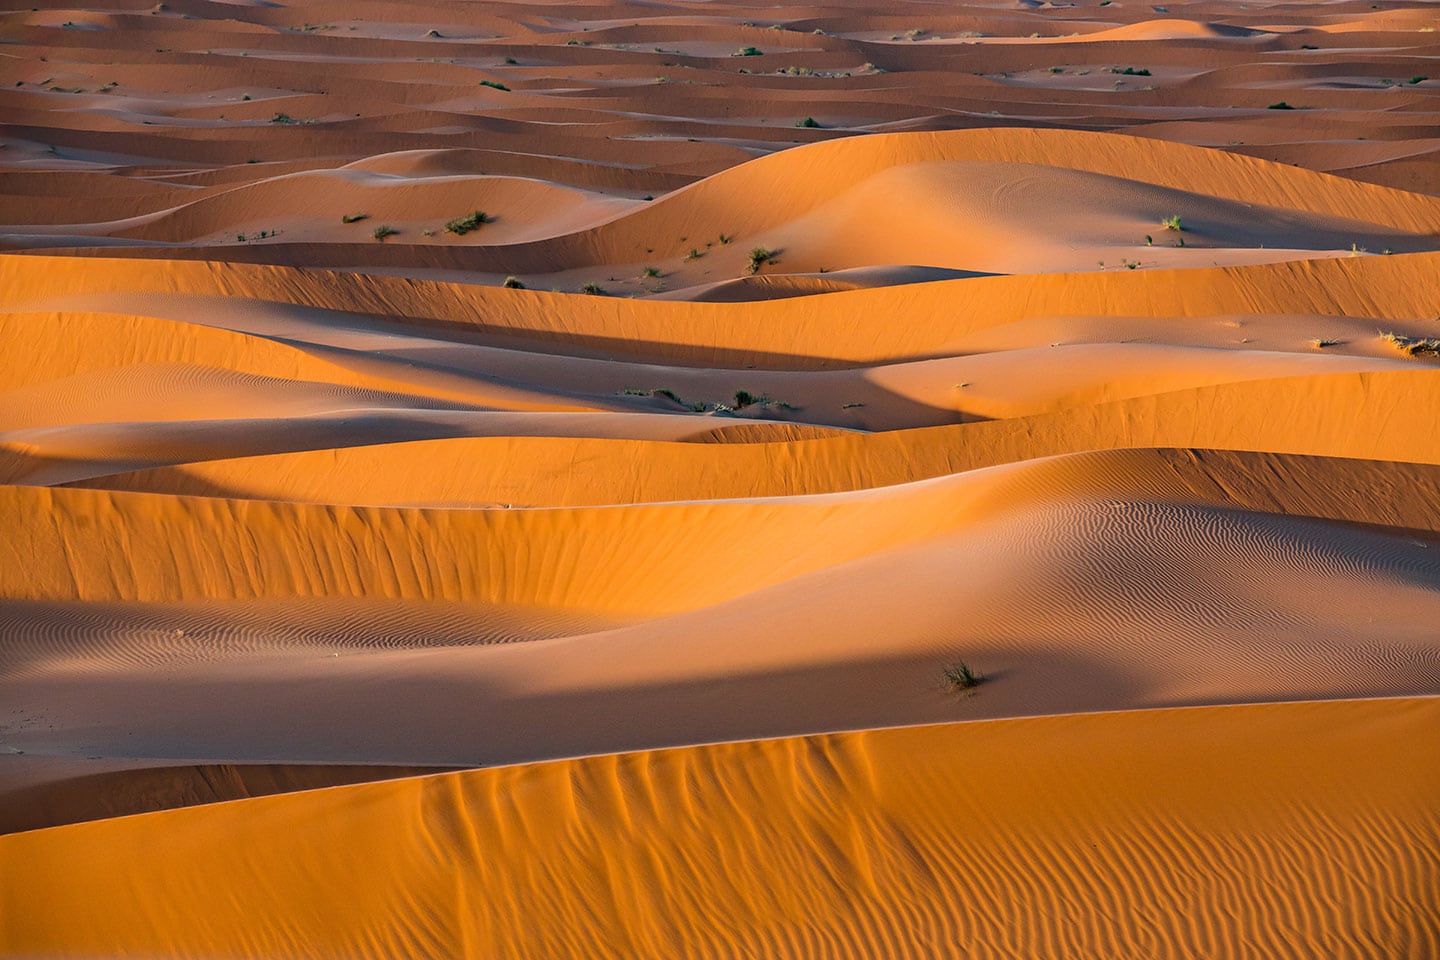 Beautiful layers of sand in the sand dunes of Zagora, Morocco